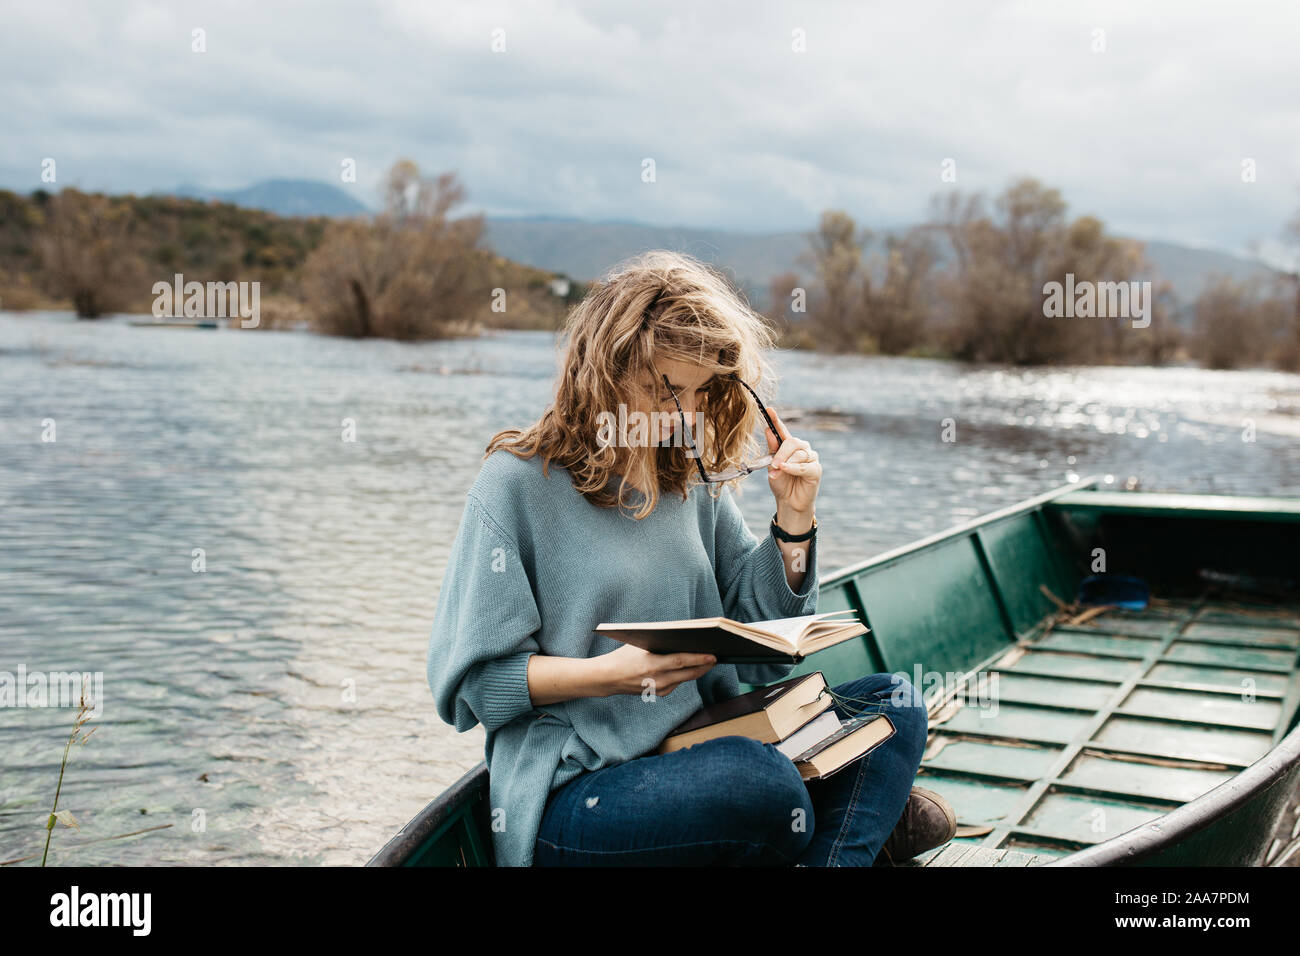 Portrait of young beautiful woman sitting on a boat and reading a book. She is bookworm and she choose between few books. Stock Photo